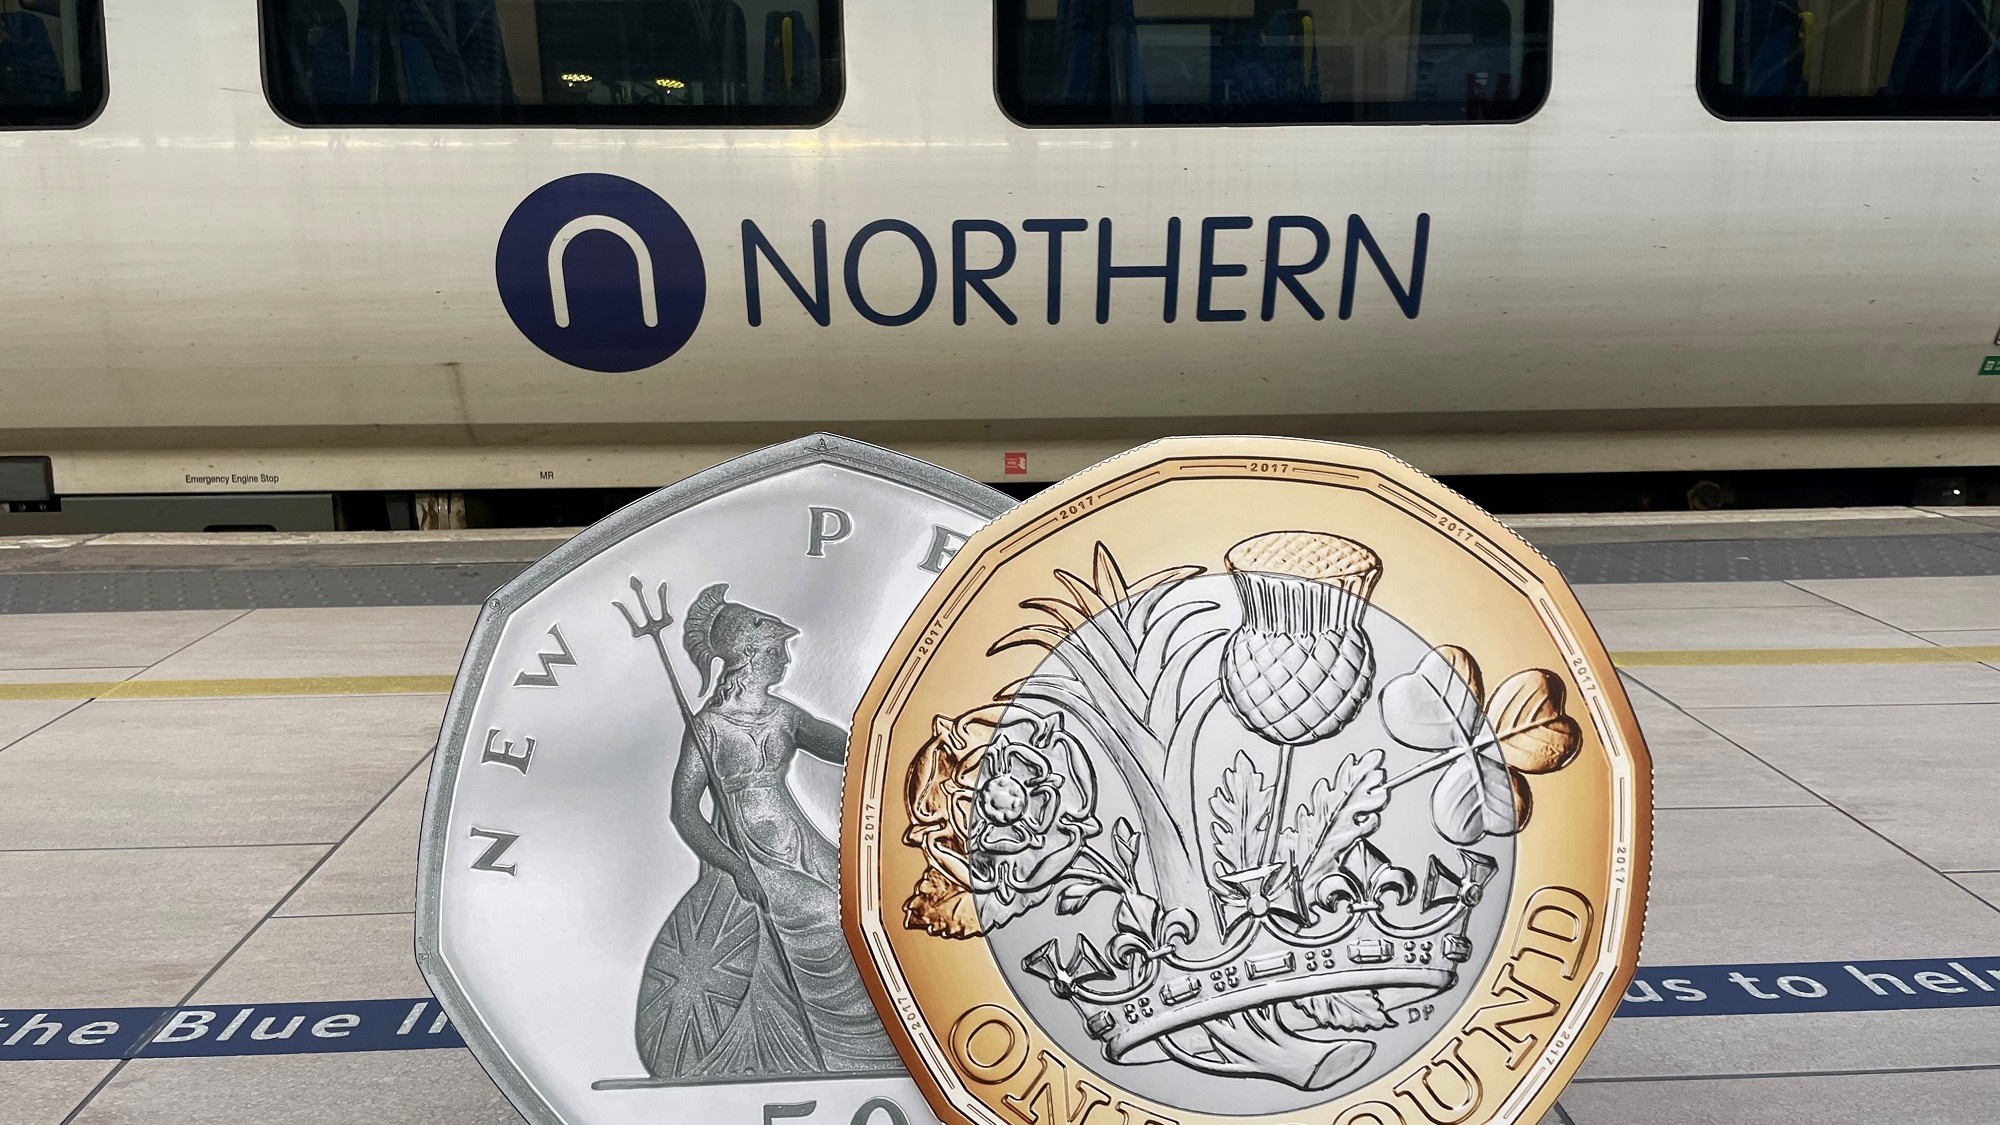 Image shows £1 coin and 50p piece alongside a Northern train-2